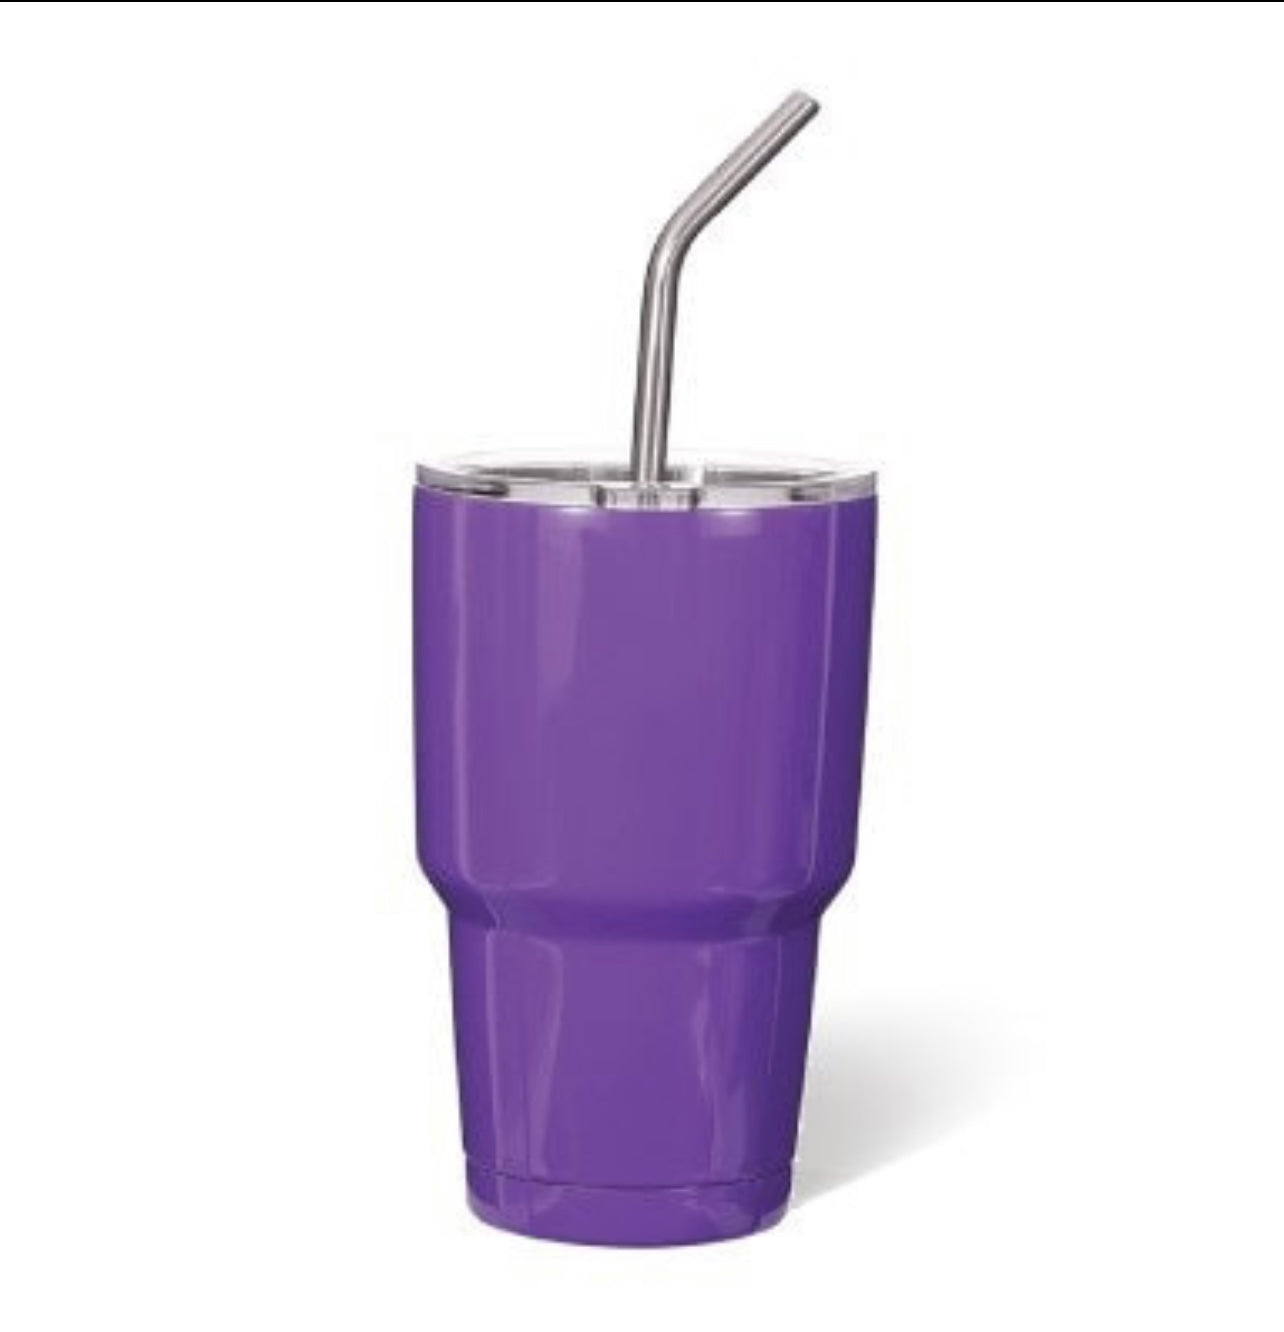 Tumbler Design Shot Cups With Straws, Stainless Steel Shot Glass